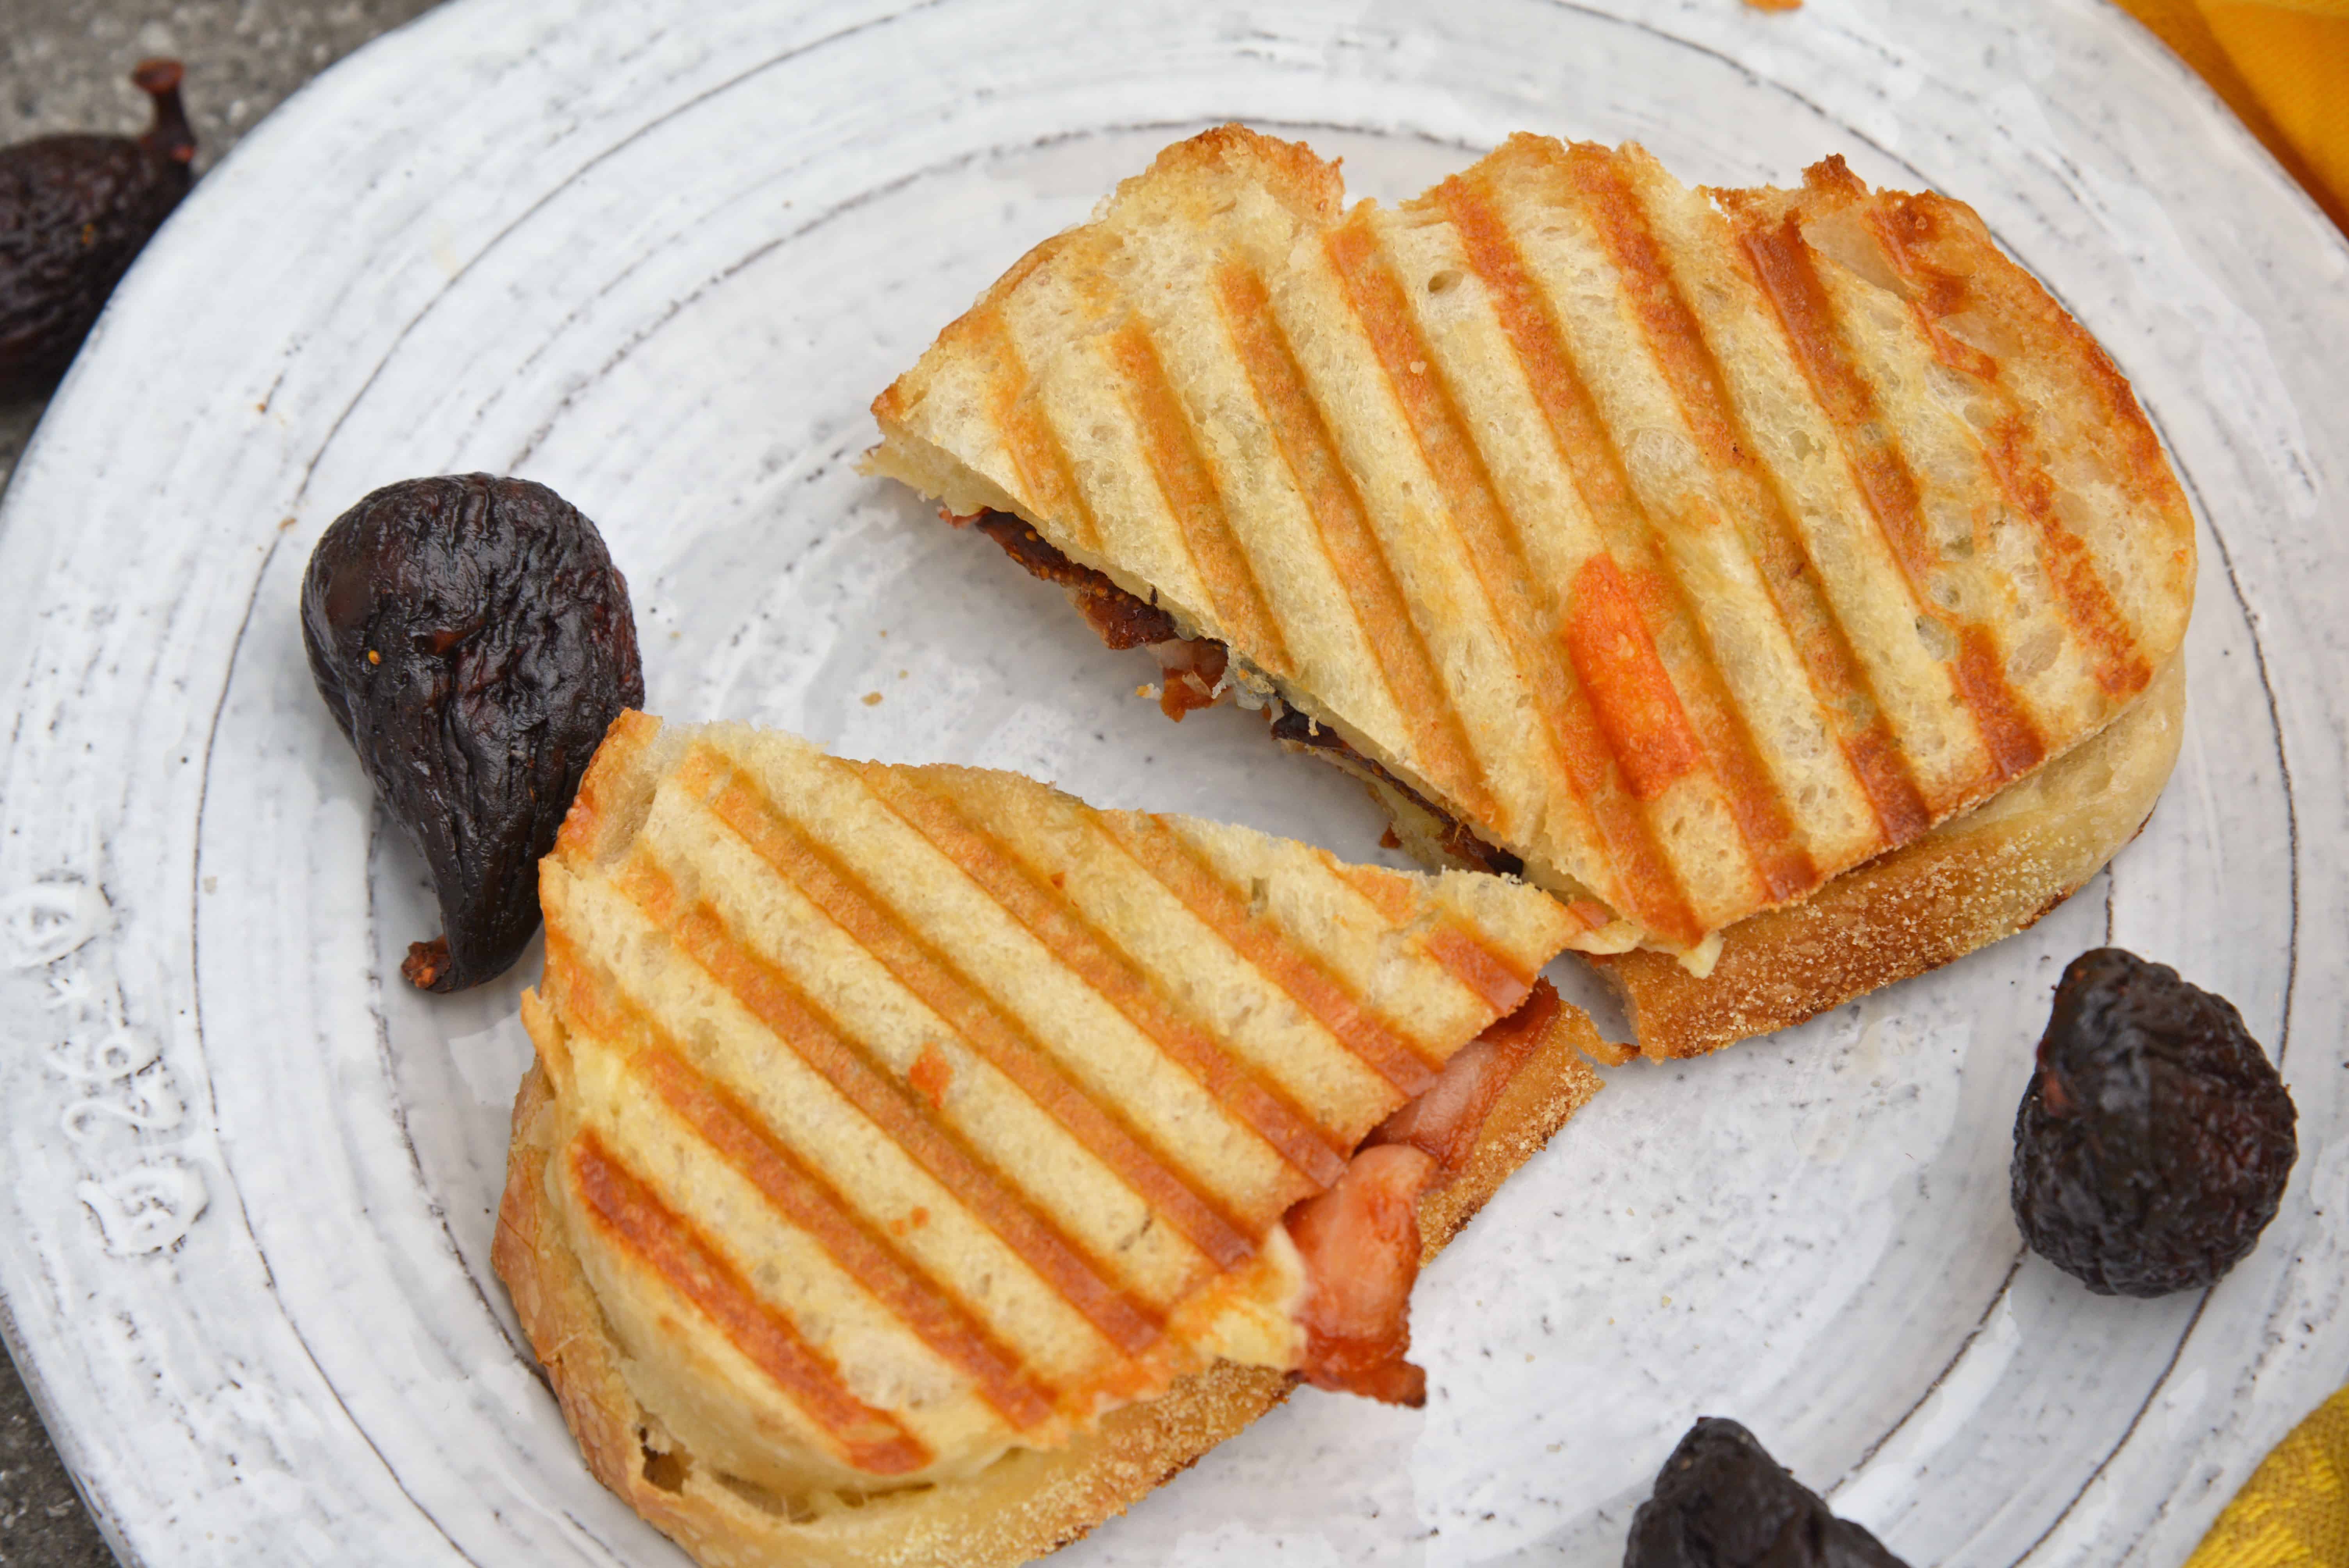 This Bacon, Pear and Fig Grilled Cheese combines sweet, savory and gooey. The ultimate grilled cheese! #gourmetgrilledcheese www.savoryexperiments.com